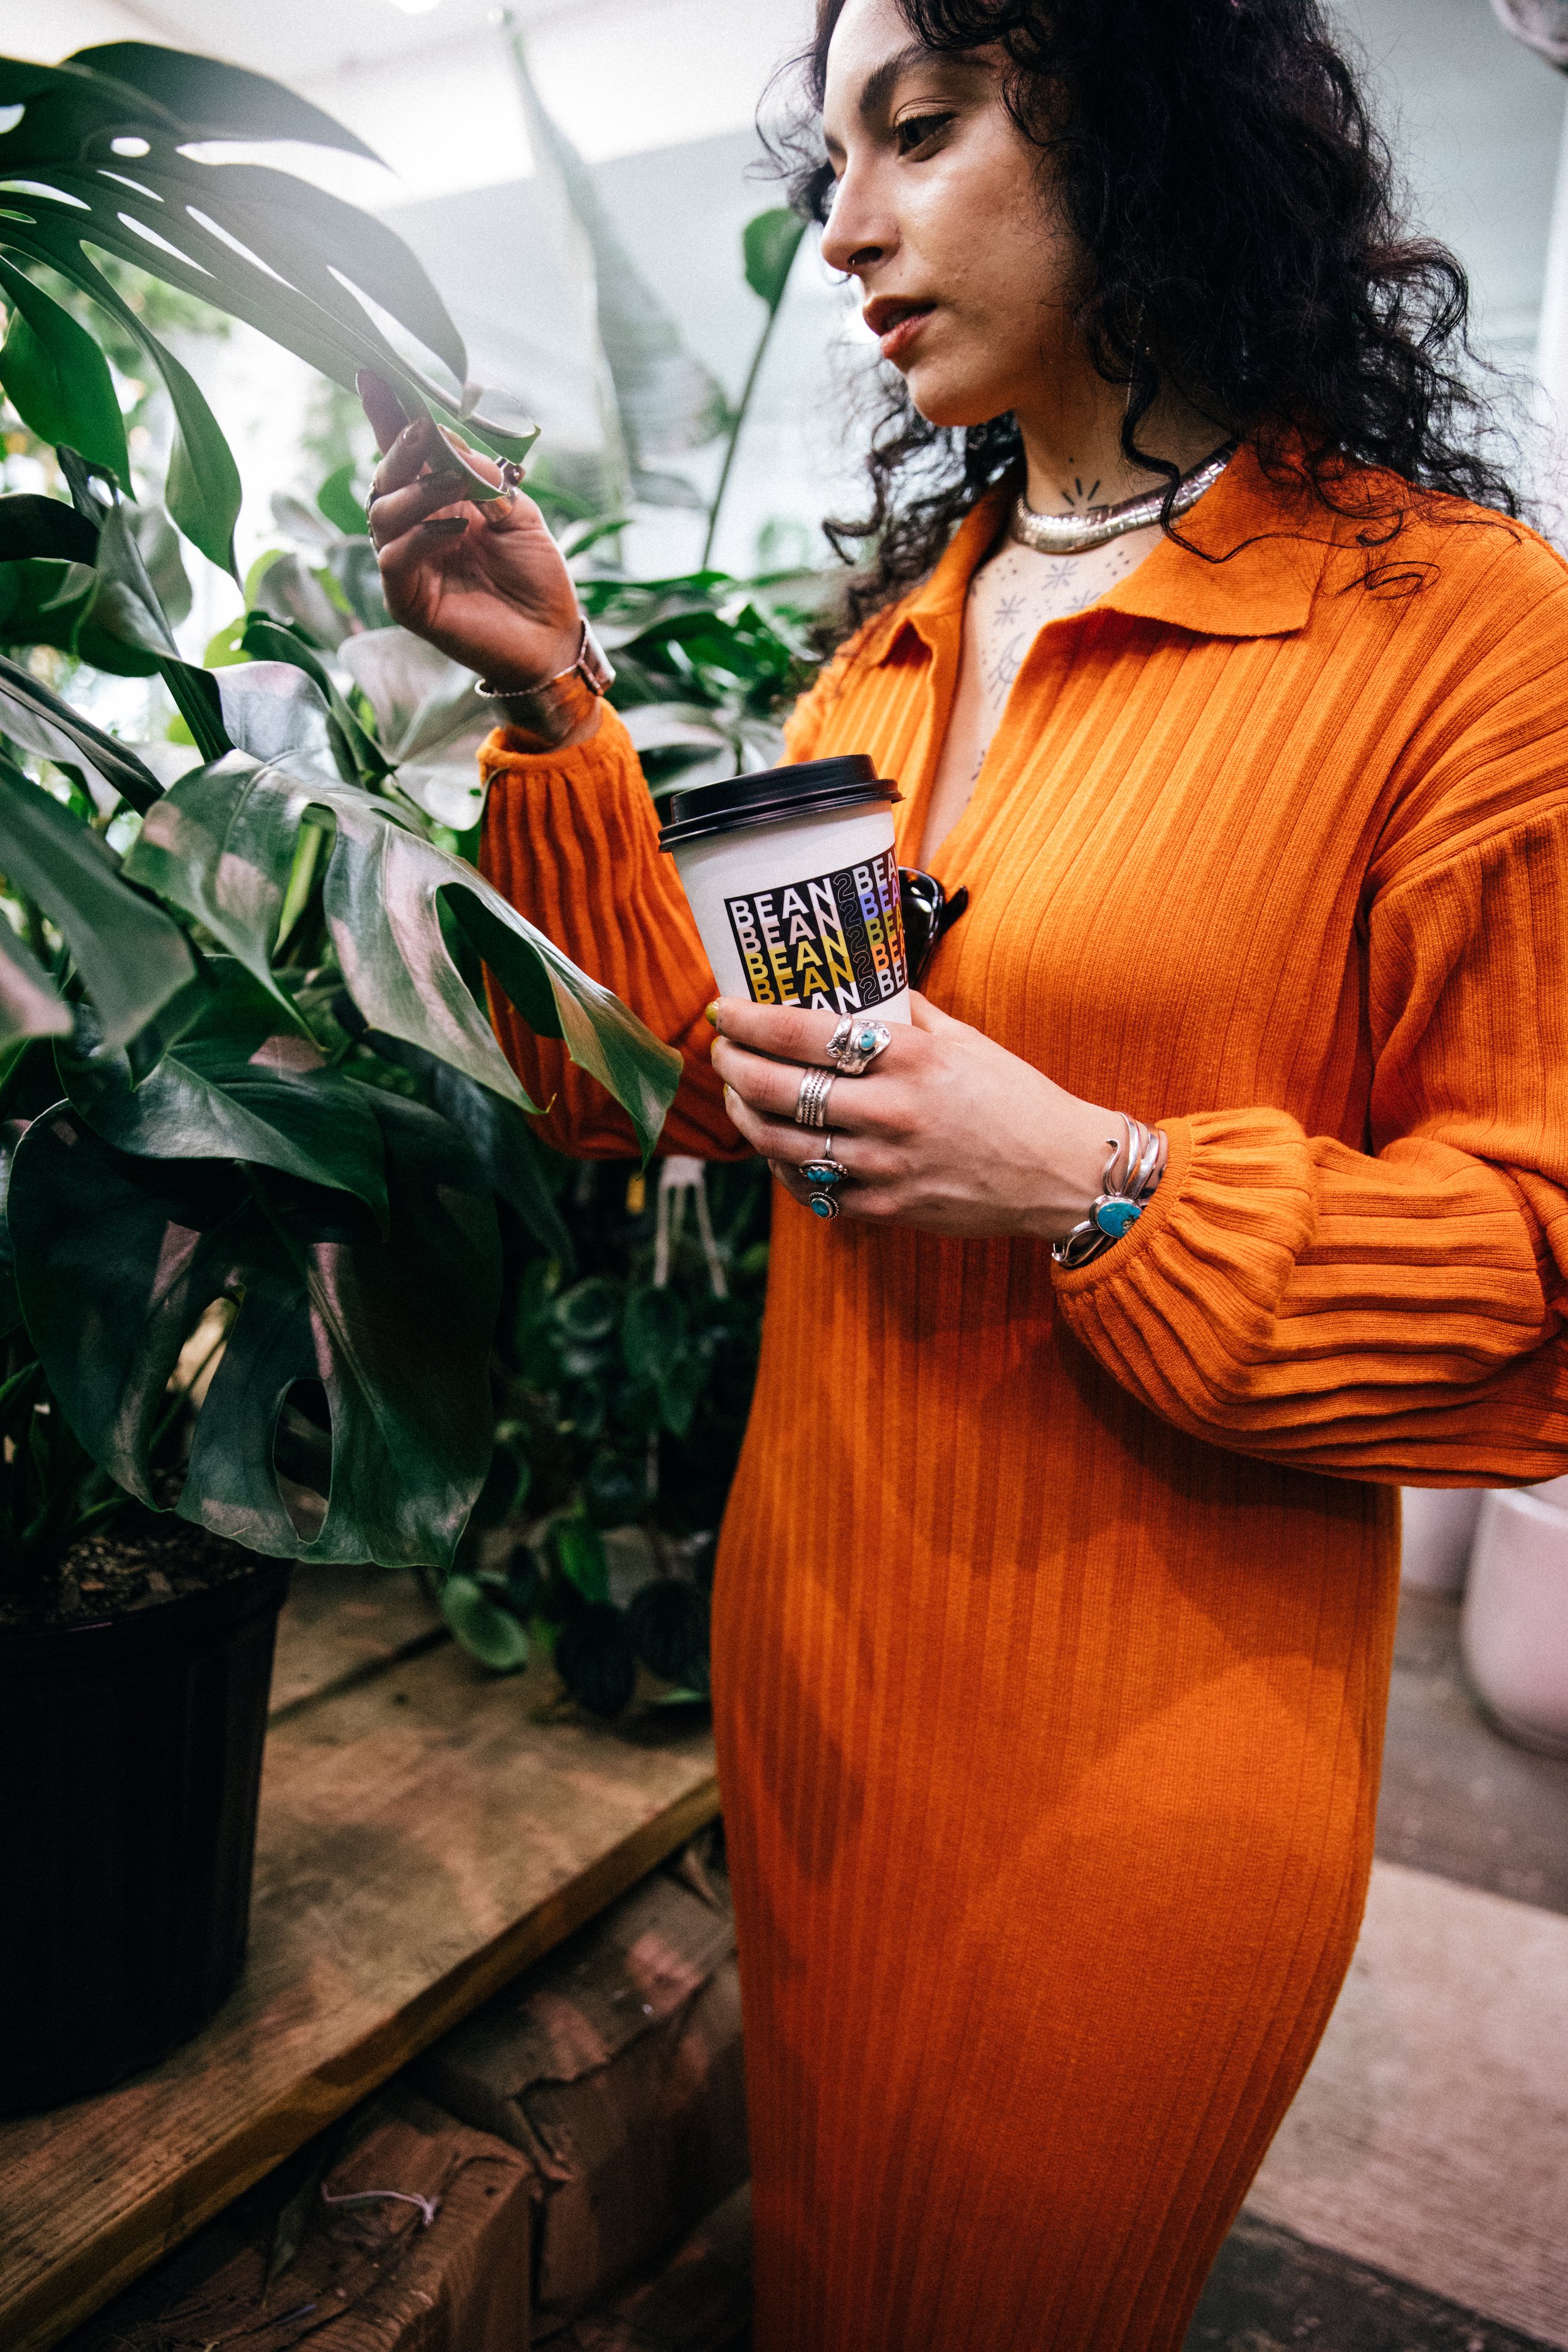 Admiring Plants with Bean2Bean Coffee, Photo by Corey Jermaine